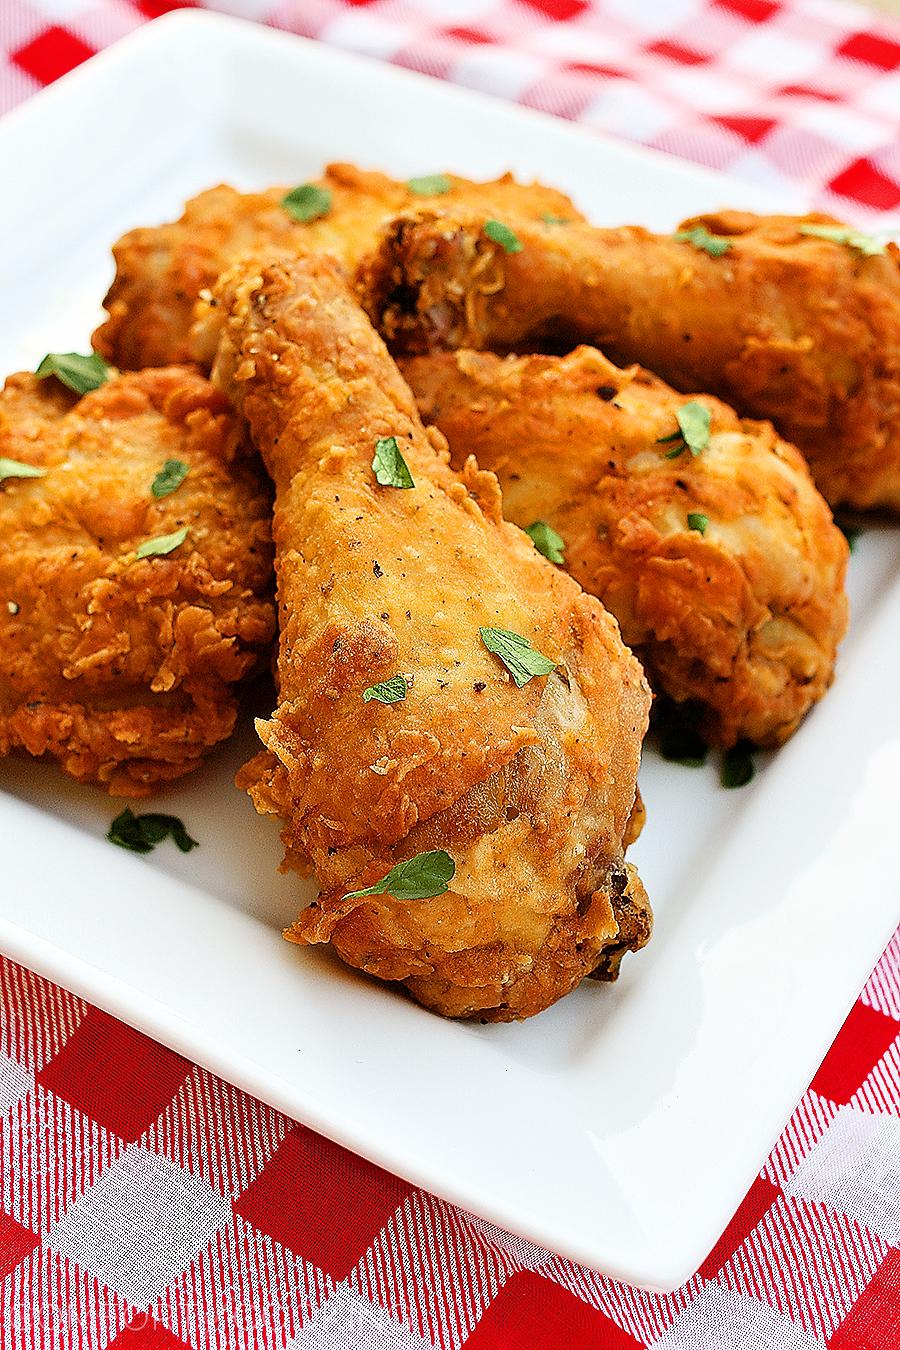 https://www.thecomfortofcooking.com/wp-content/uploads/2012/08/Spicy-Southern-Fried-Chicken.jpg